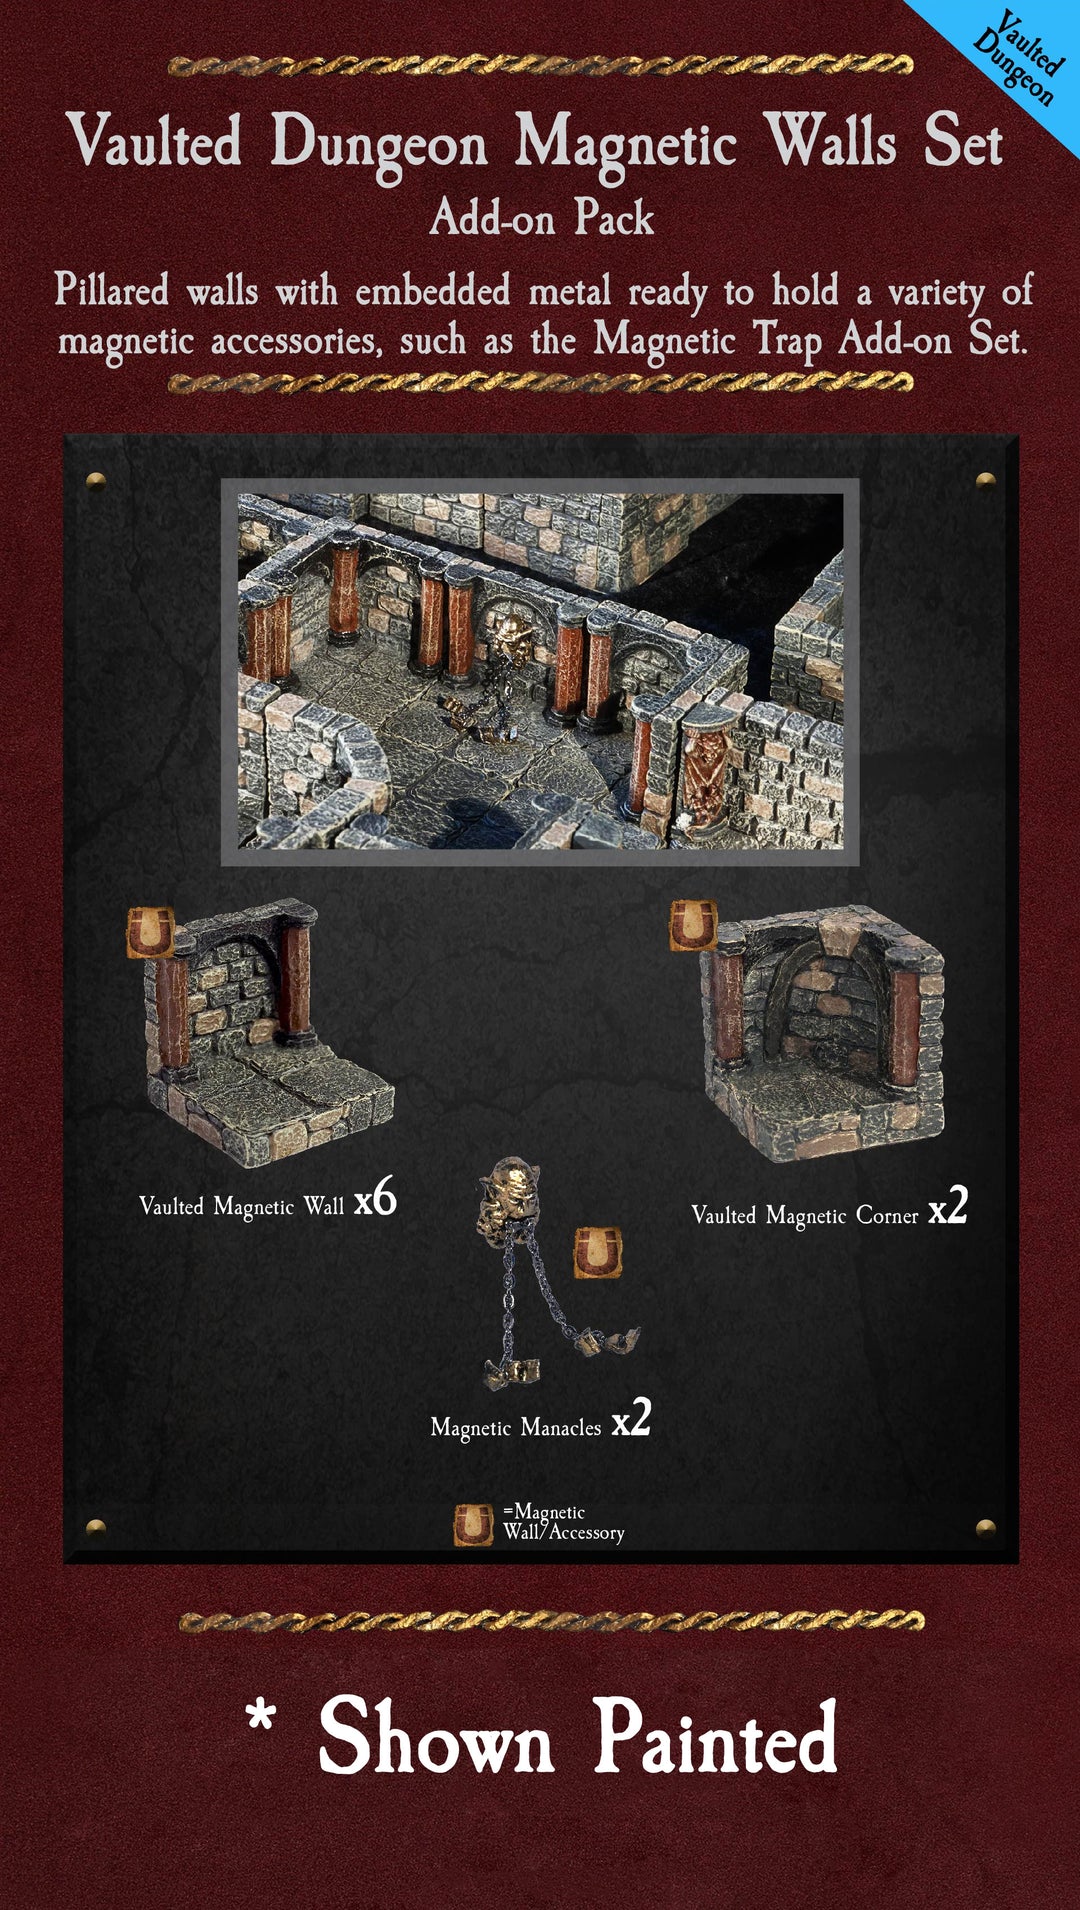 Vaulted Dungeon Magnetic Walls - Unpainted